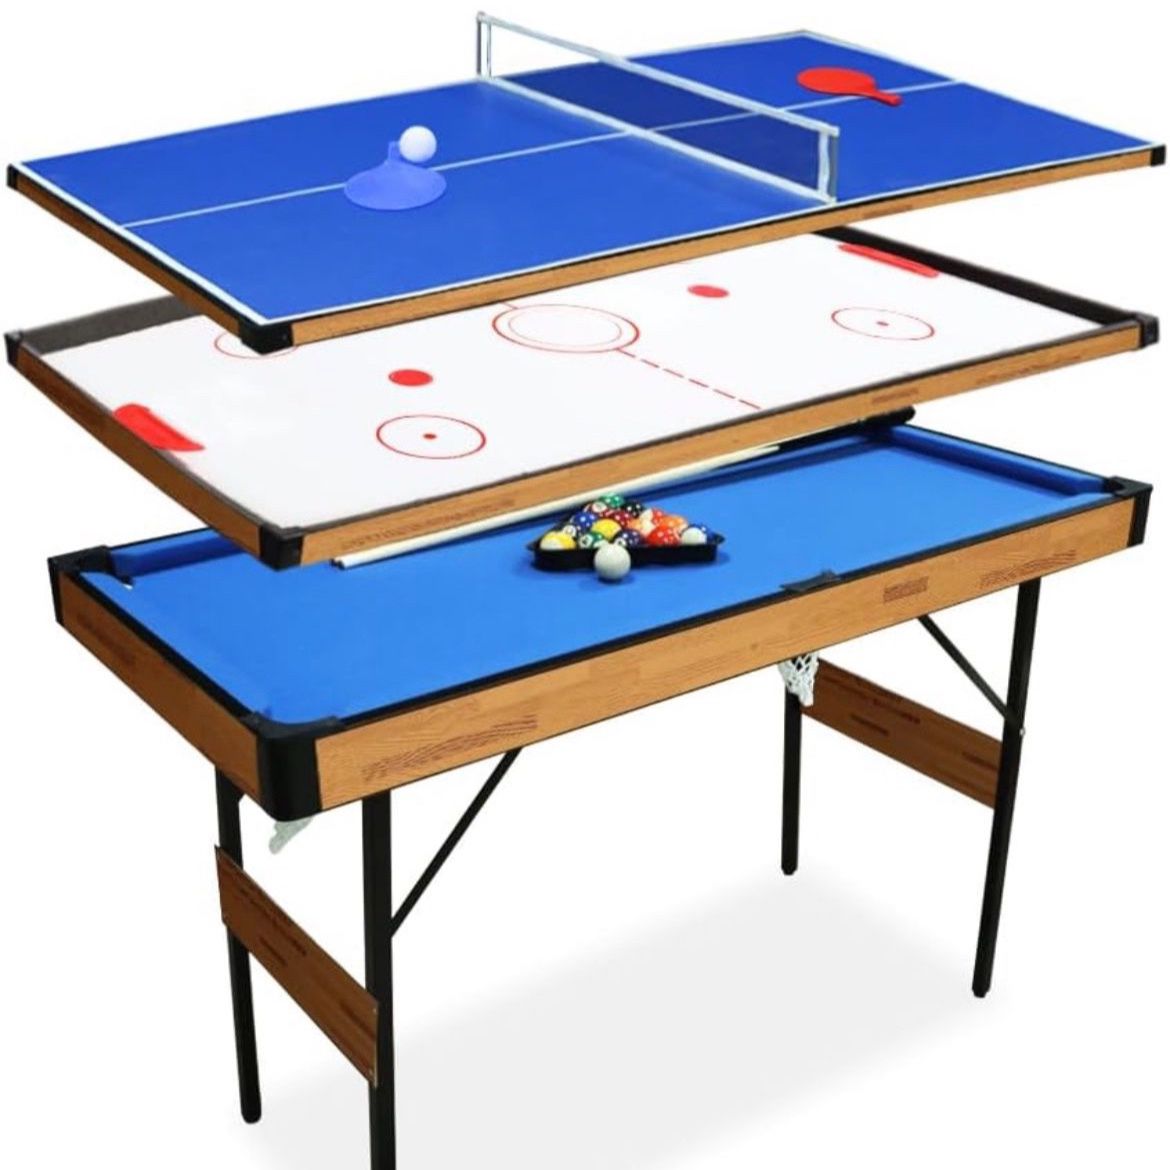 New In Box 3 in 1 Multi Game Table, 55”, Ping Pong, Pool Billiard,Hockey Combo/table Tennis 